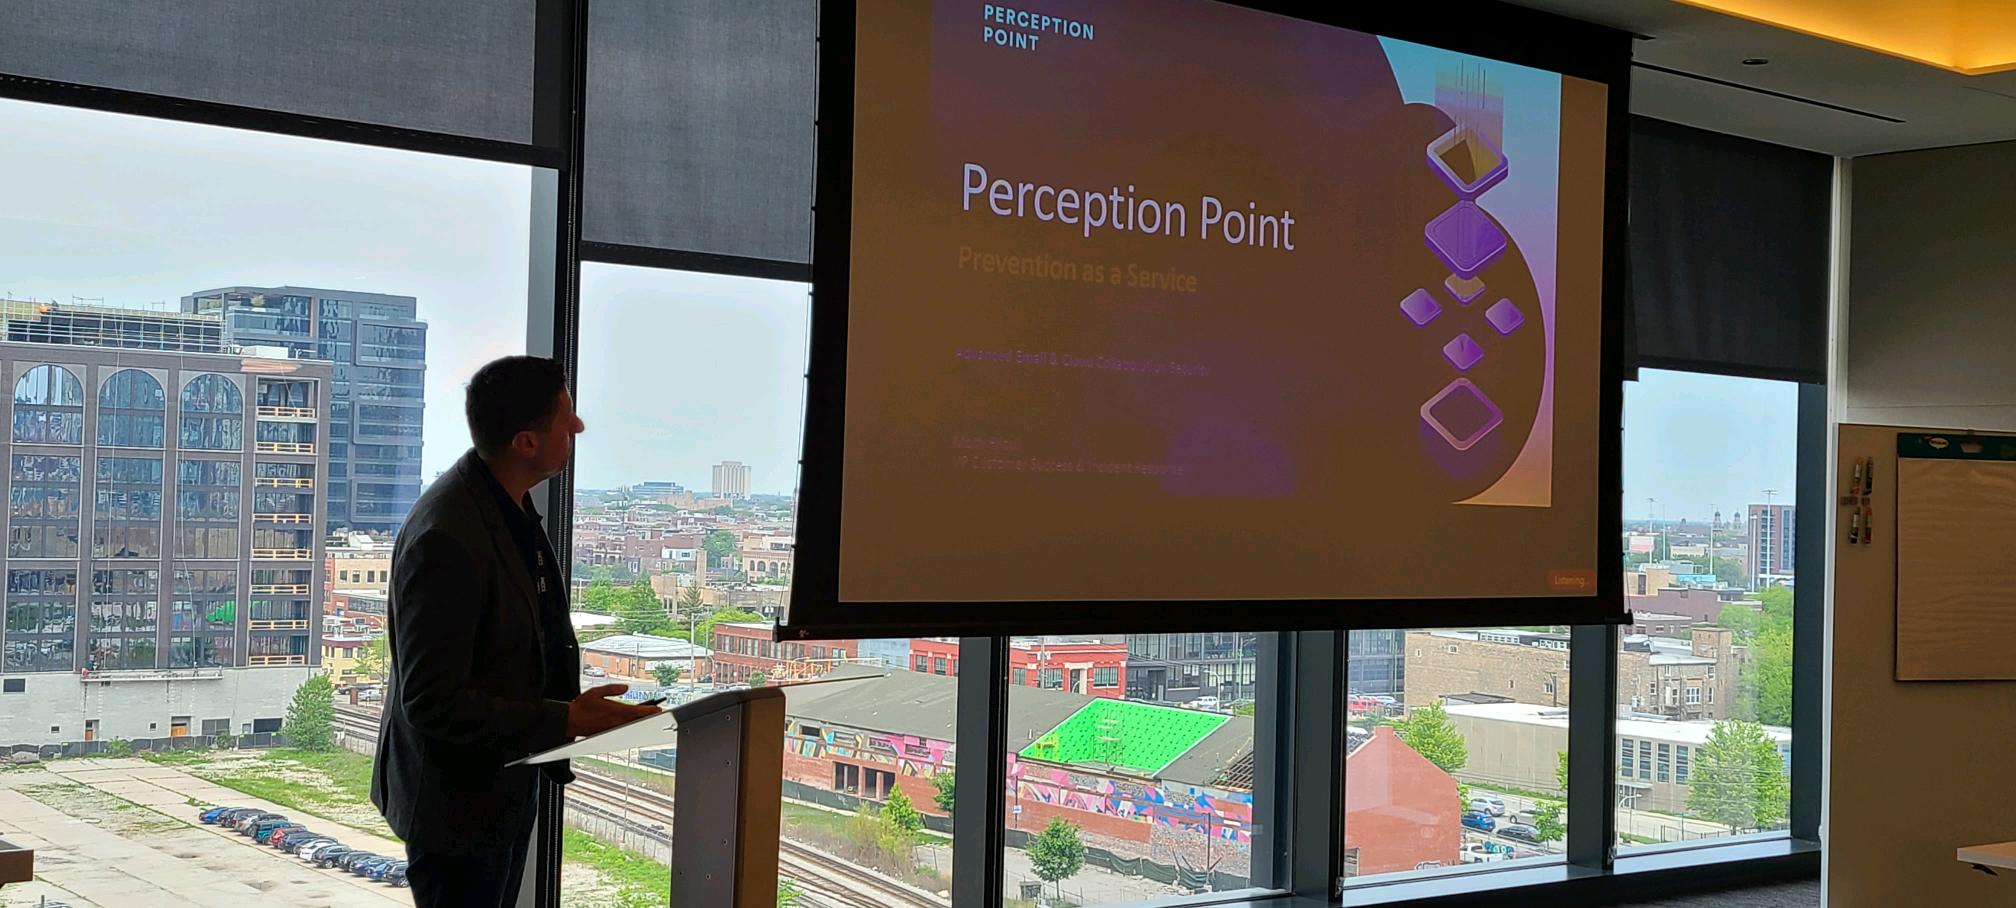 A man is standing in front of a screen with a presentation about Perception Point, a cloud-based service that prevents cyberattacks.